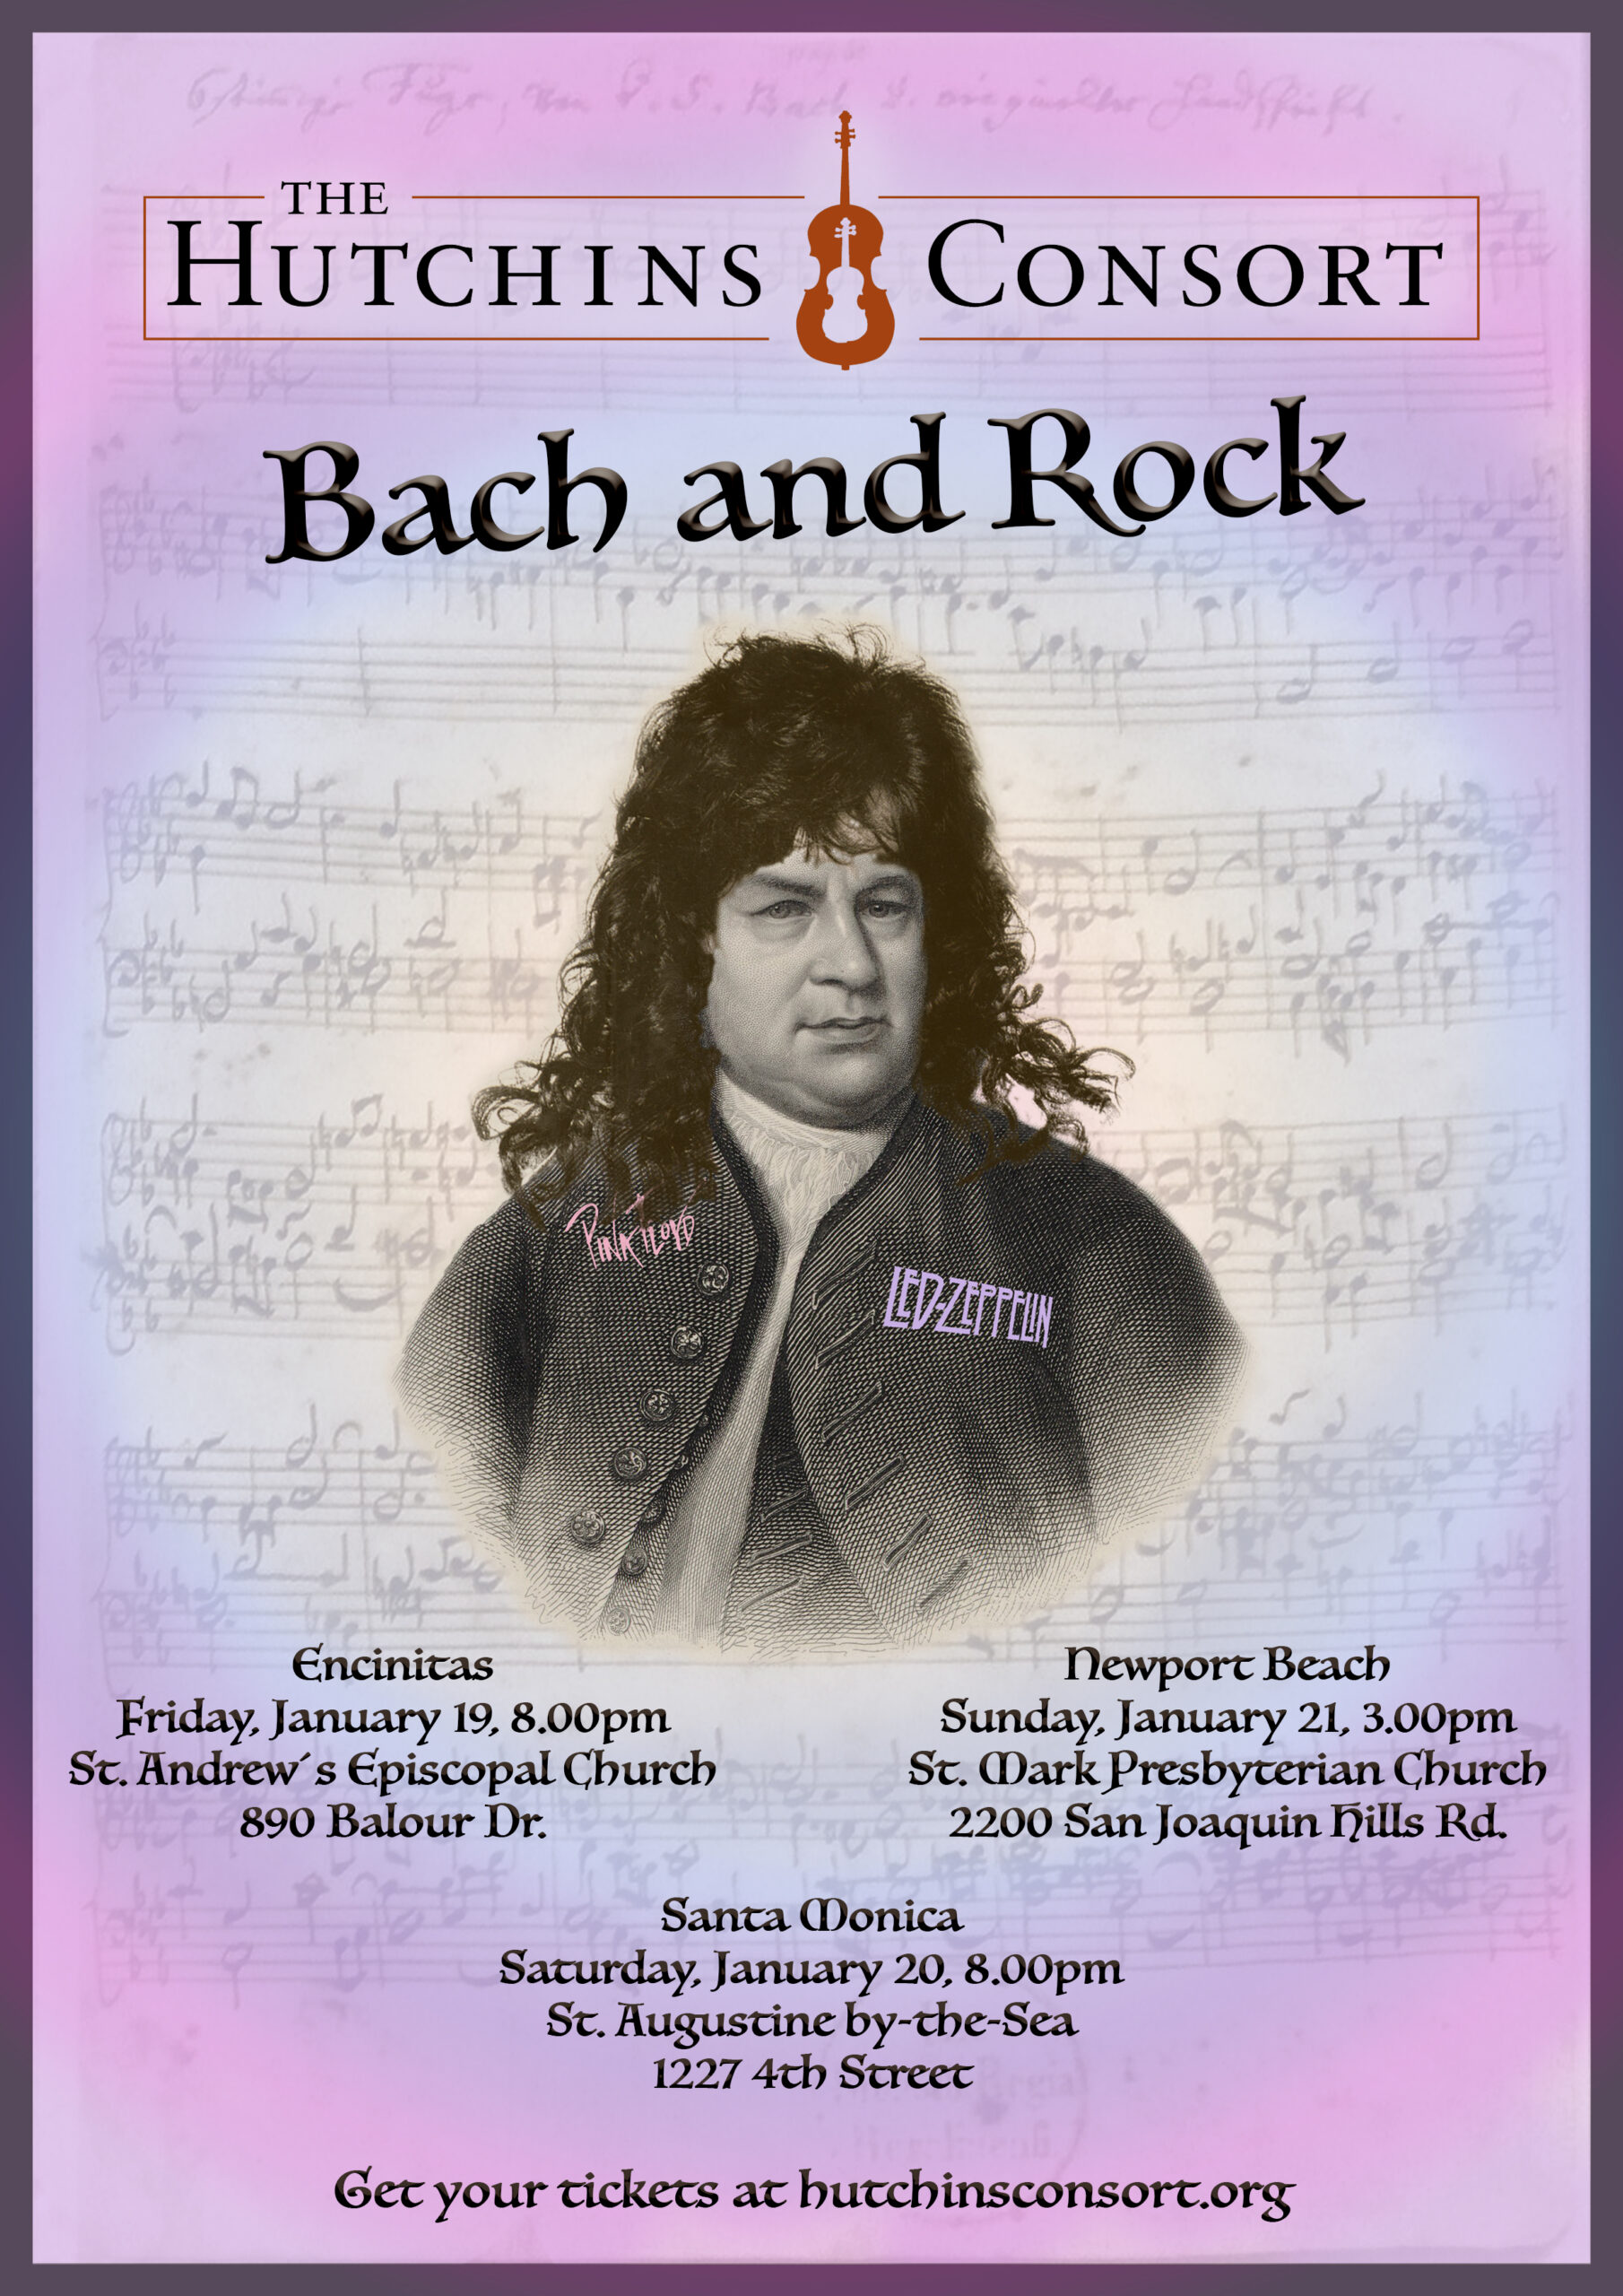 The Hutchins Consort presents: Bach and Rock